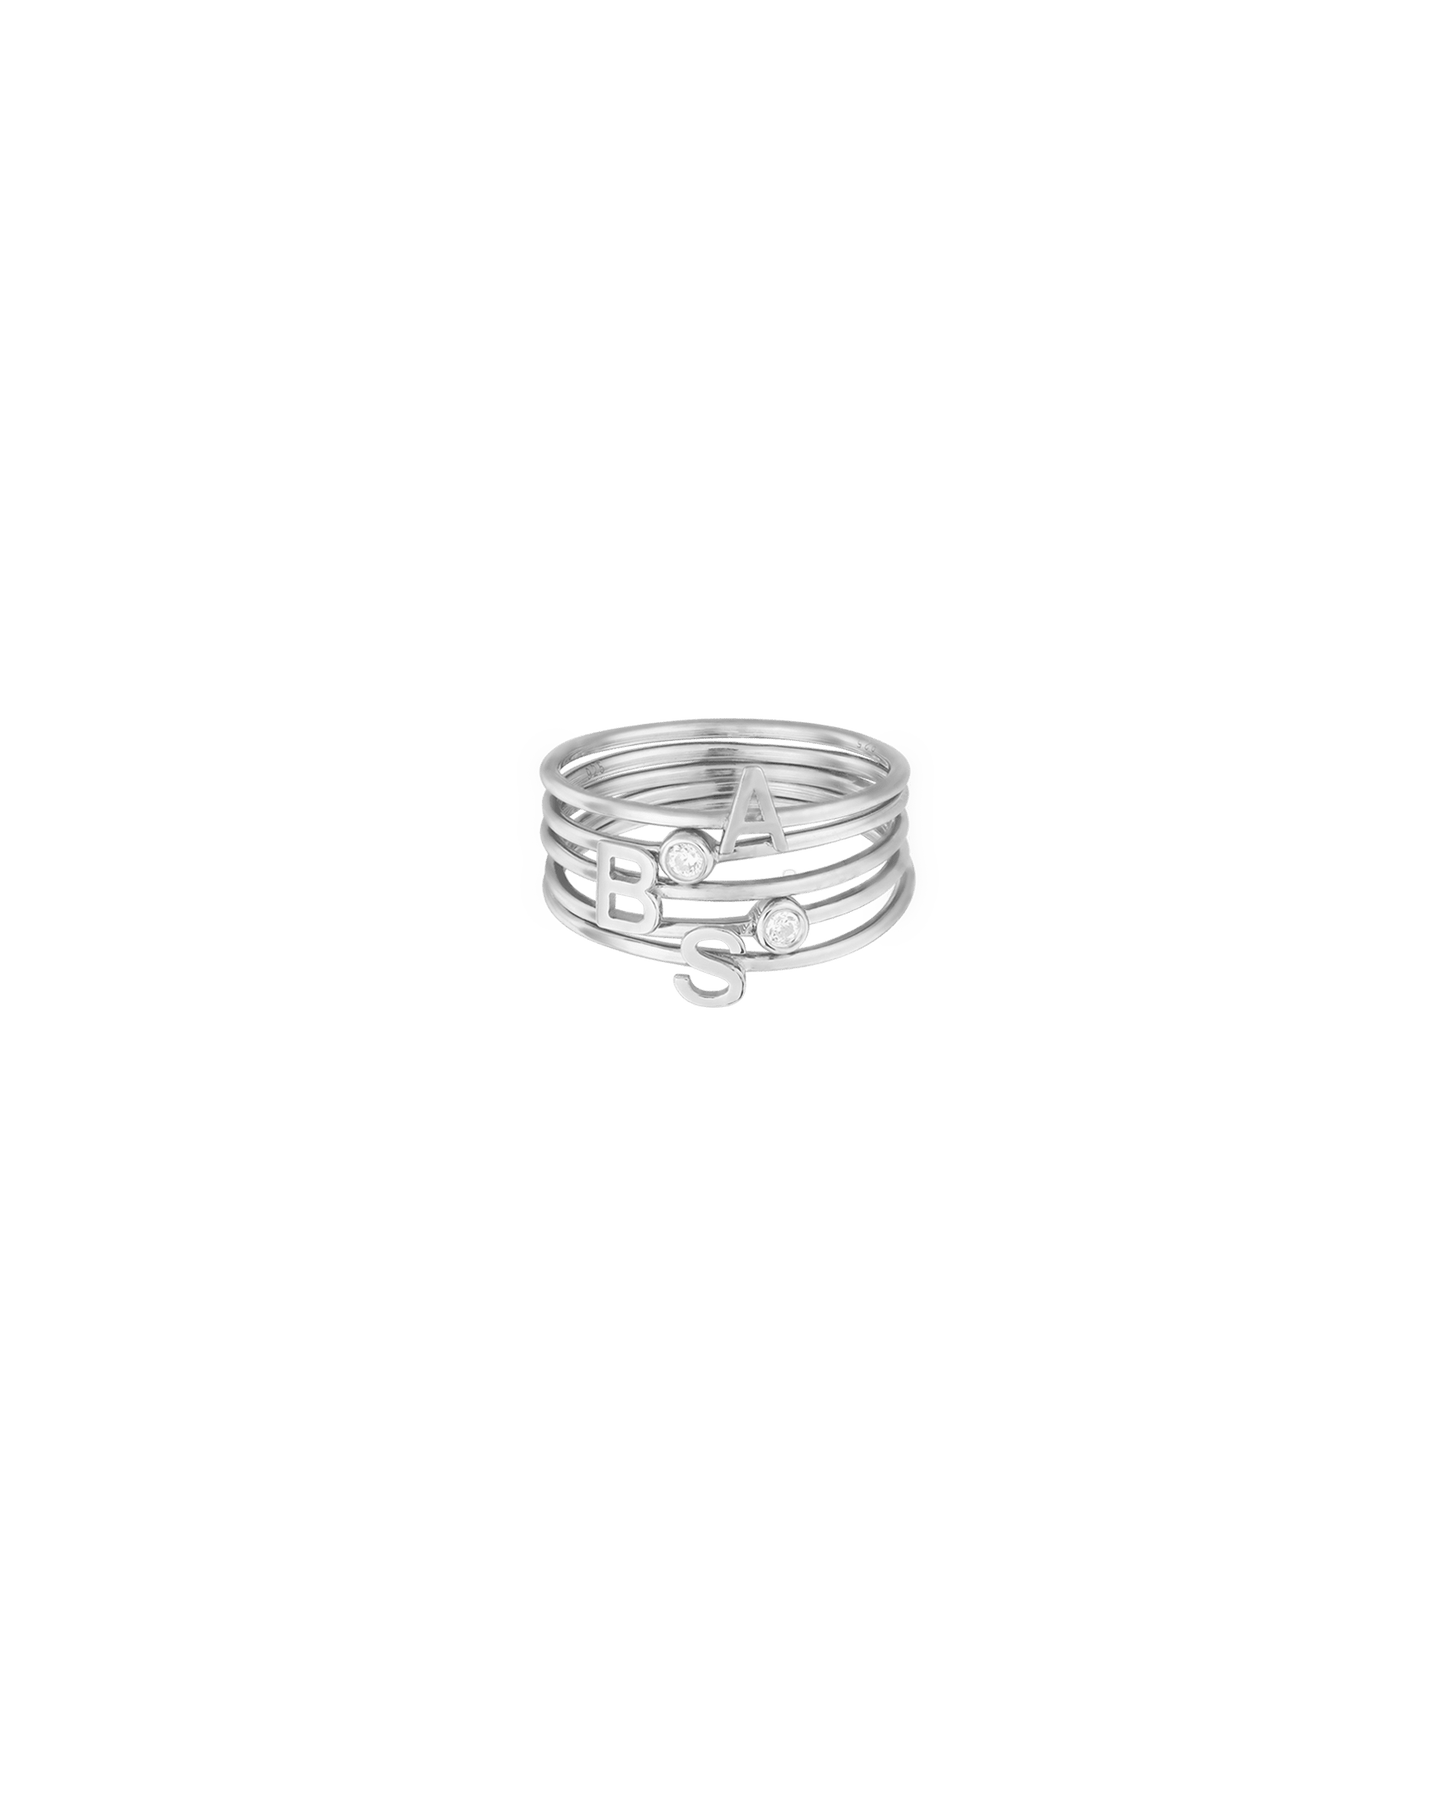 Stackable Initial Ring(s) - 925 Sterling Silver Rings magal-dev 1 Ring US 4 